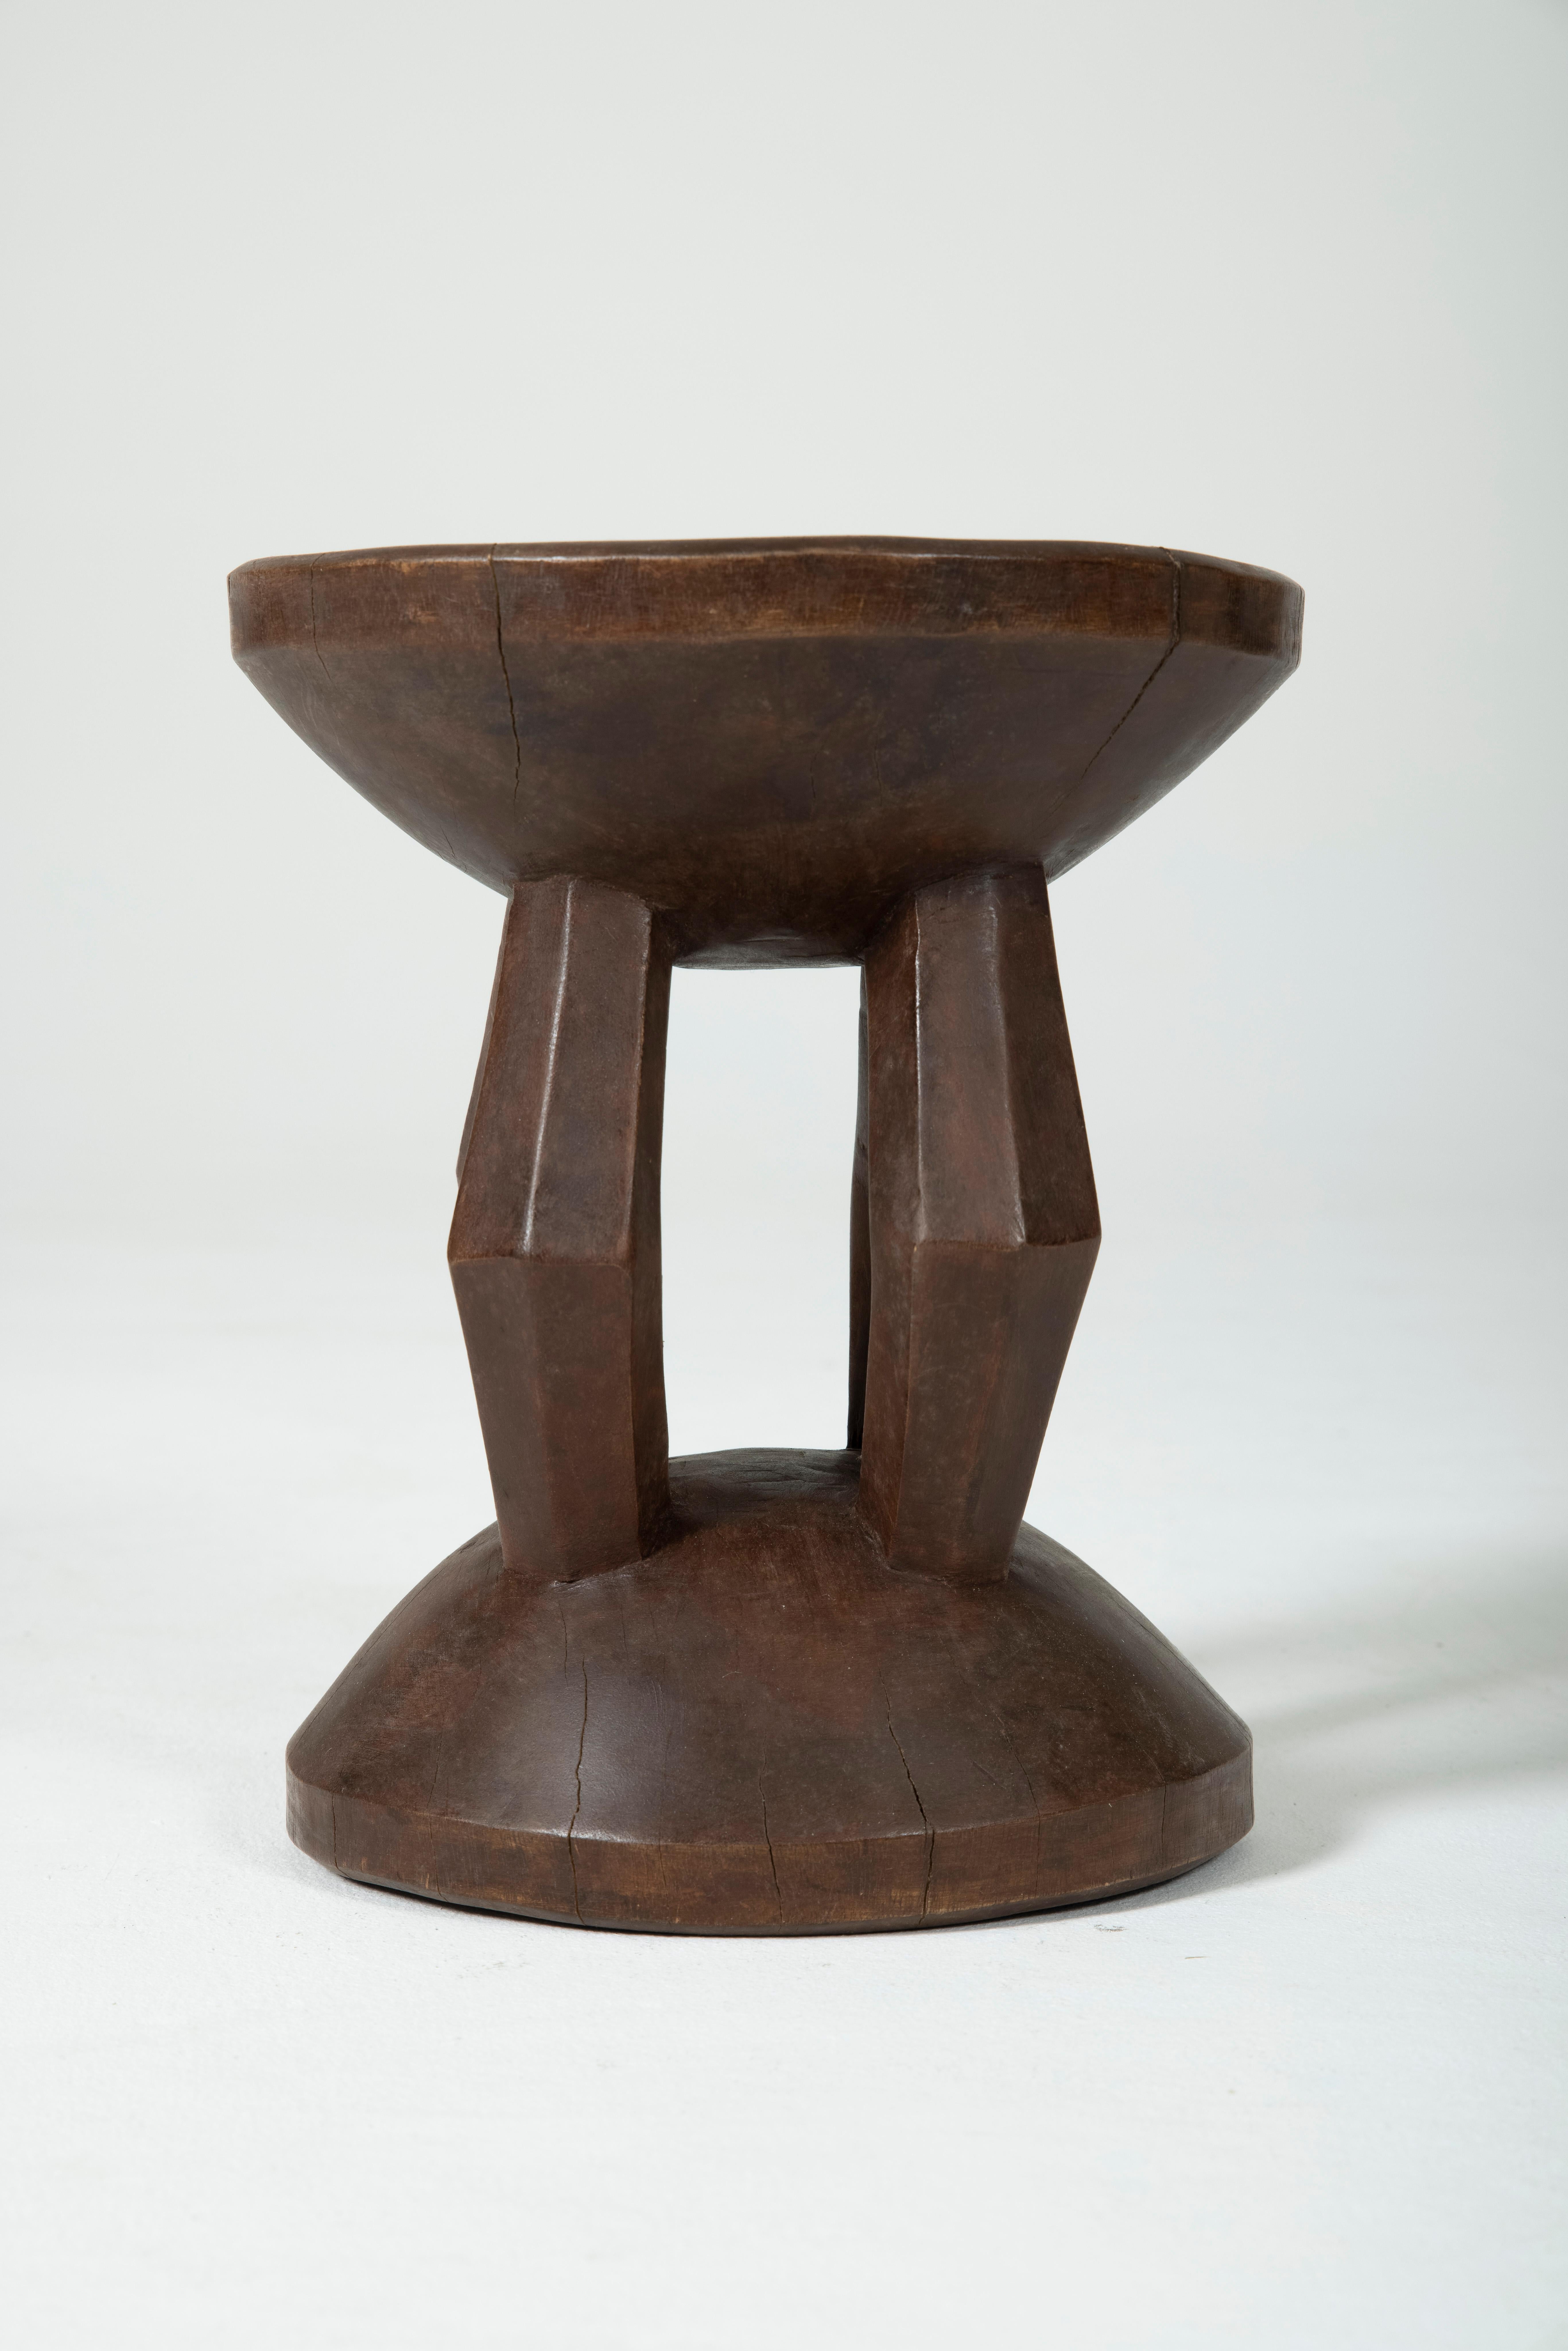 20th Century Stool or Side Table Dogon